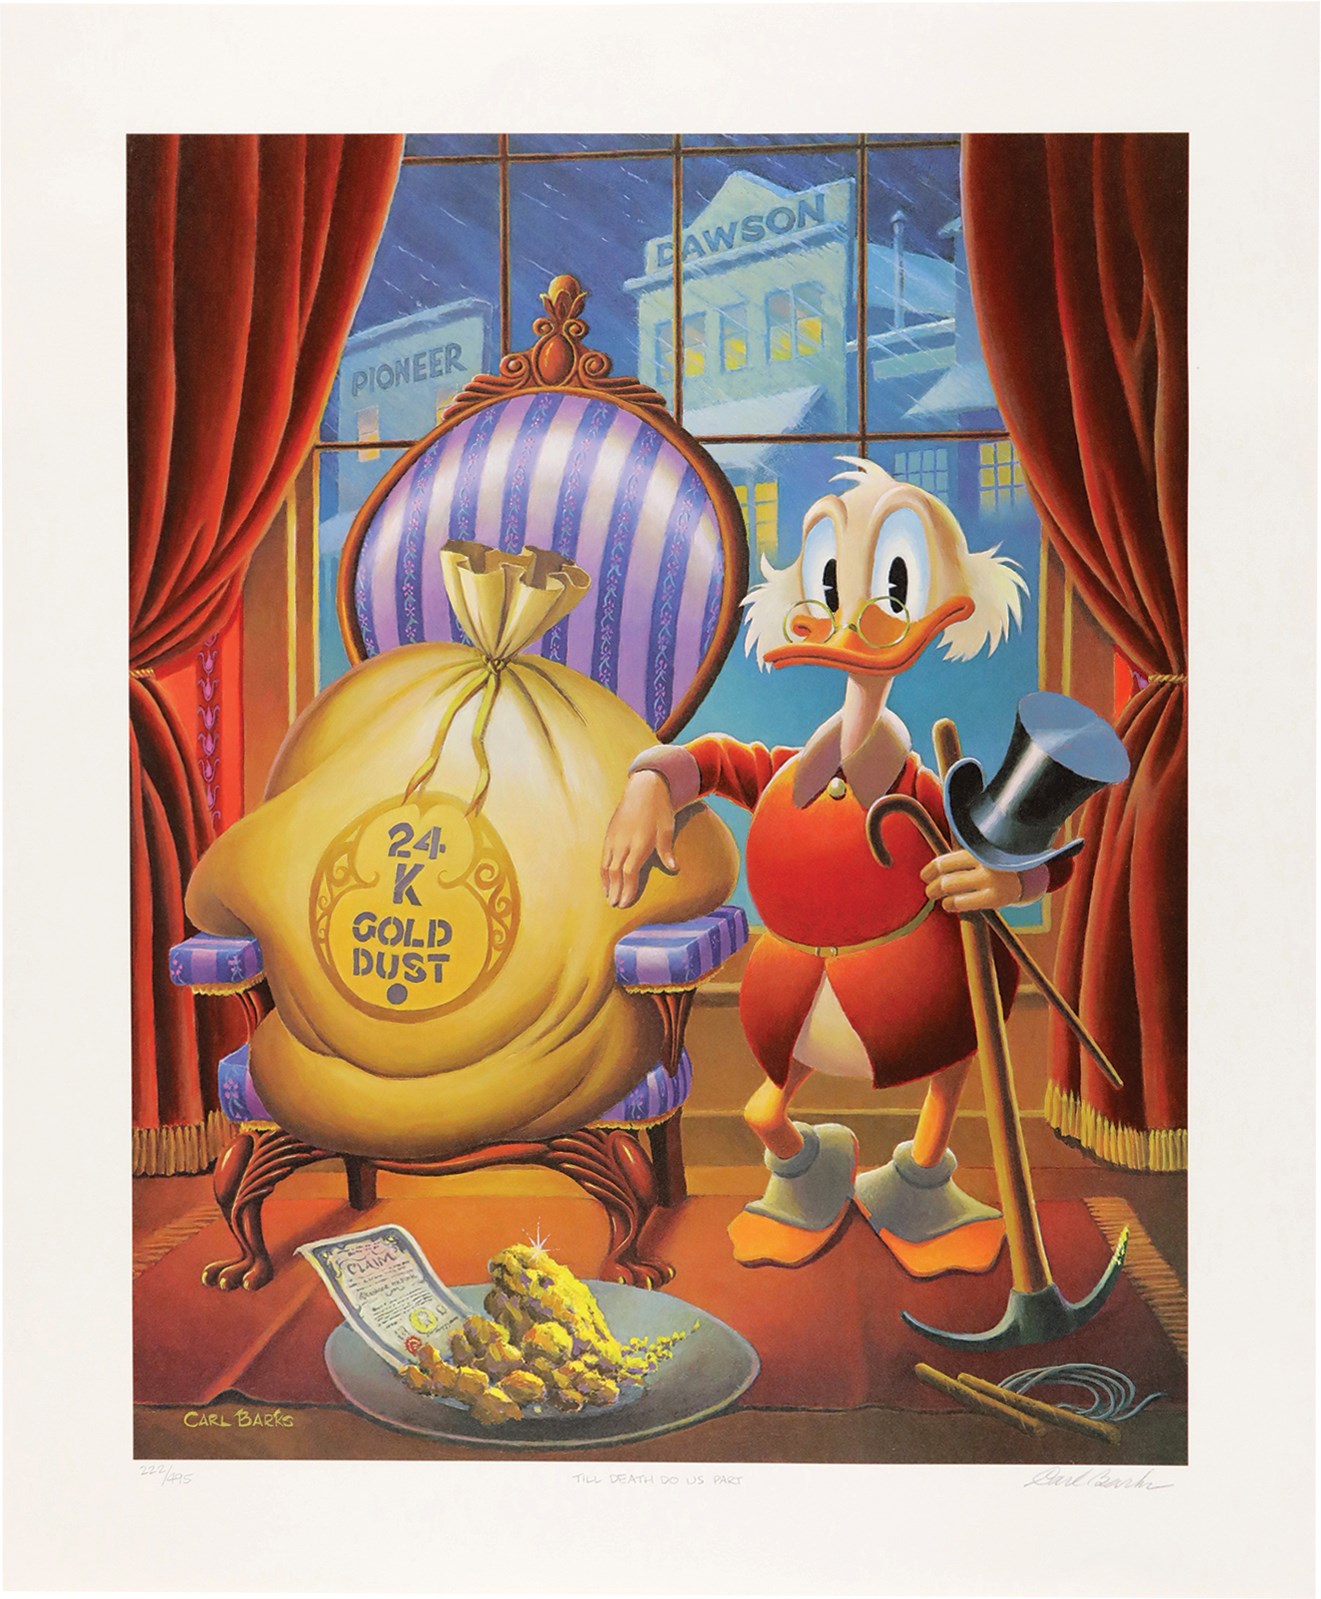 - Signed 1984 Carl Barks "Till Death Do Us Part" Limited Edition Lithograph (222/495)